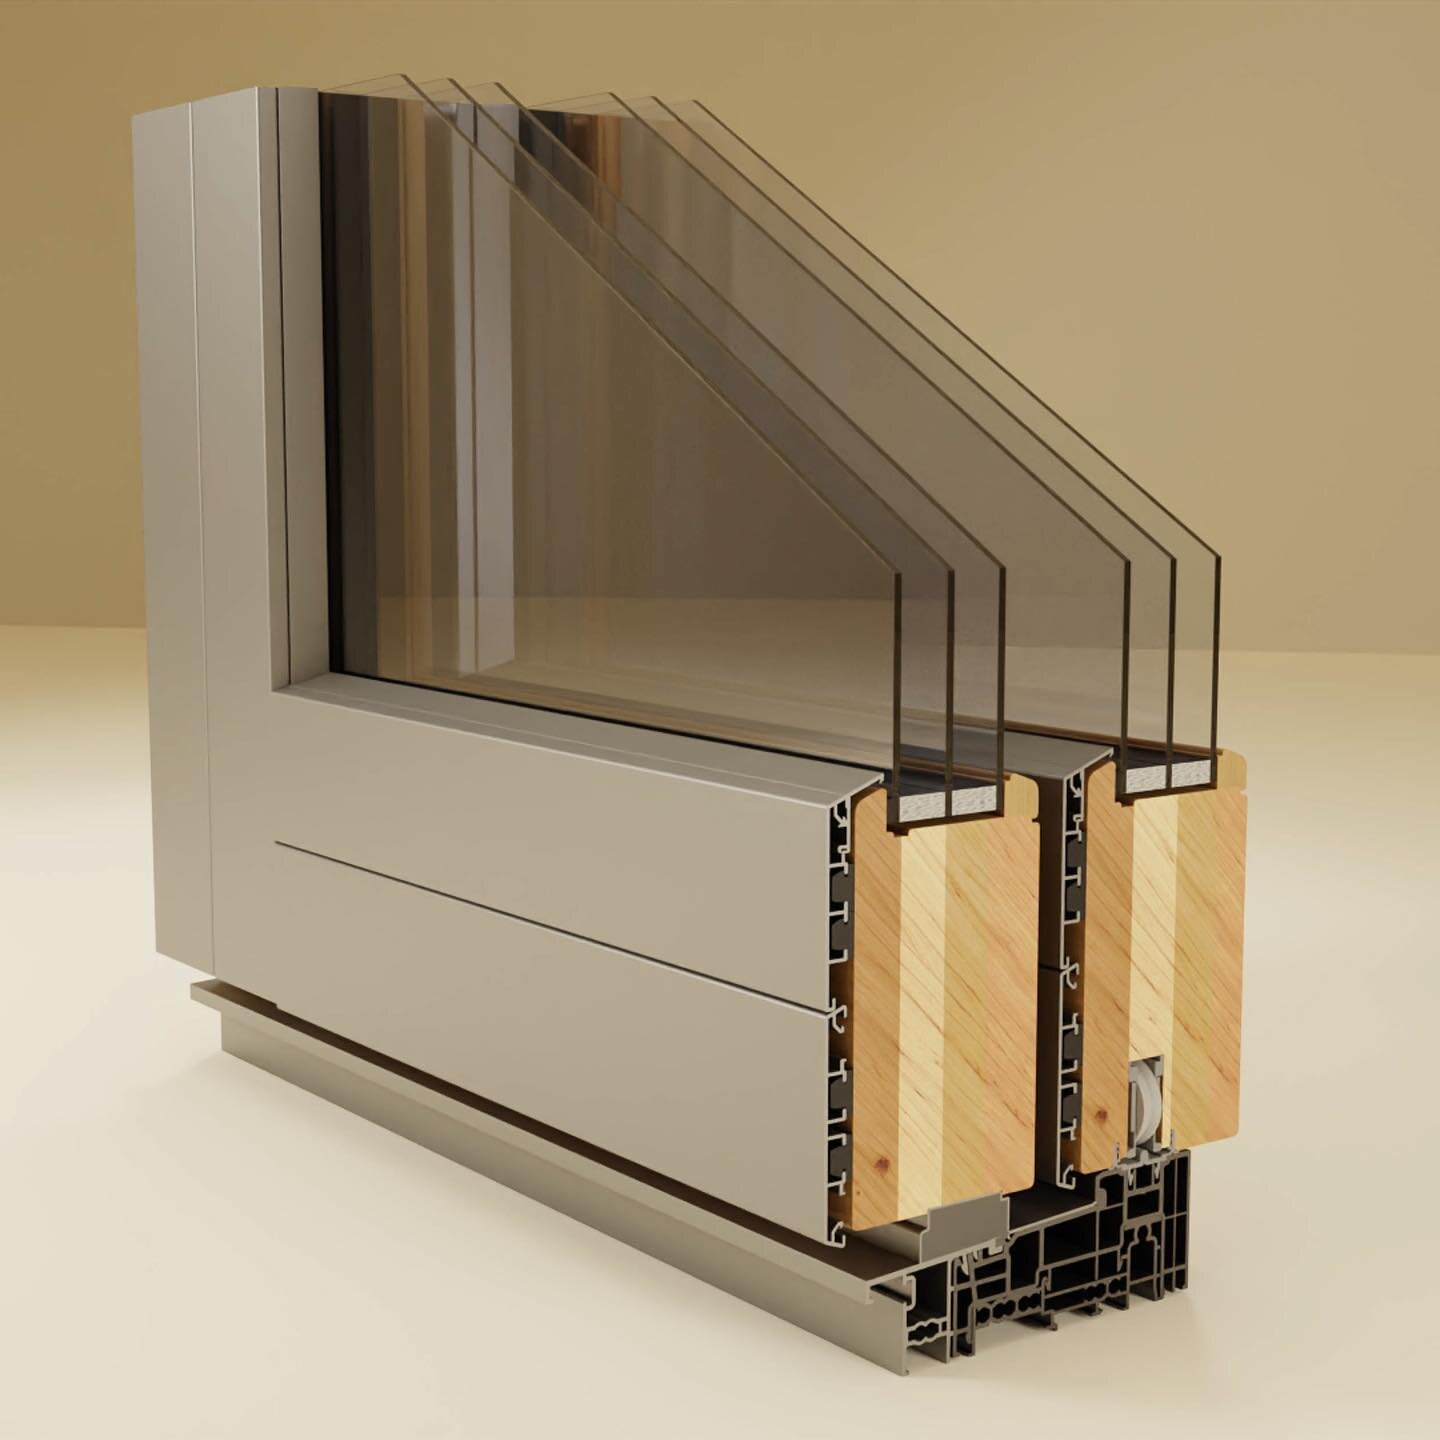 Timber - aluminium | Medis - aliuminis

Timber windows and doors may last much longer and achieve superior quality if they are cladded with aluminium. Aluminium protects wooden windows and doors surface from harmful environmental effects, UV radiatio